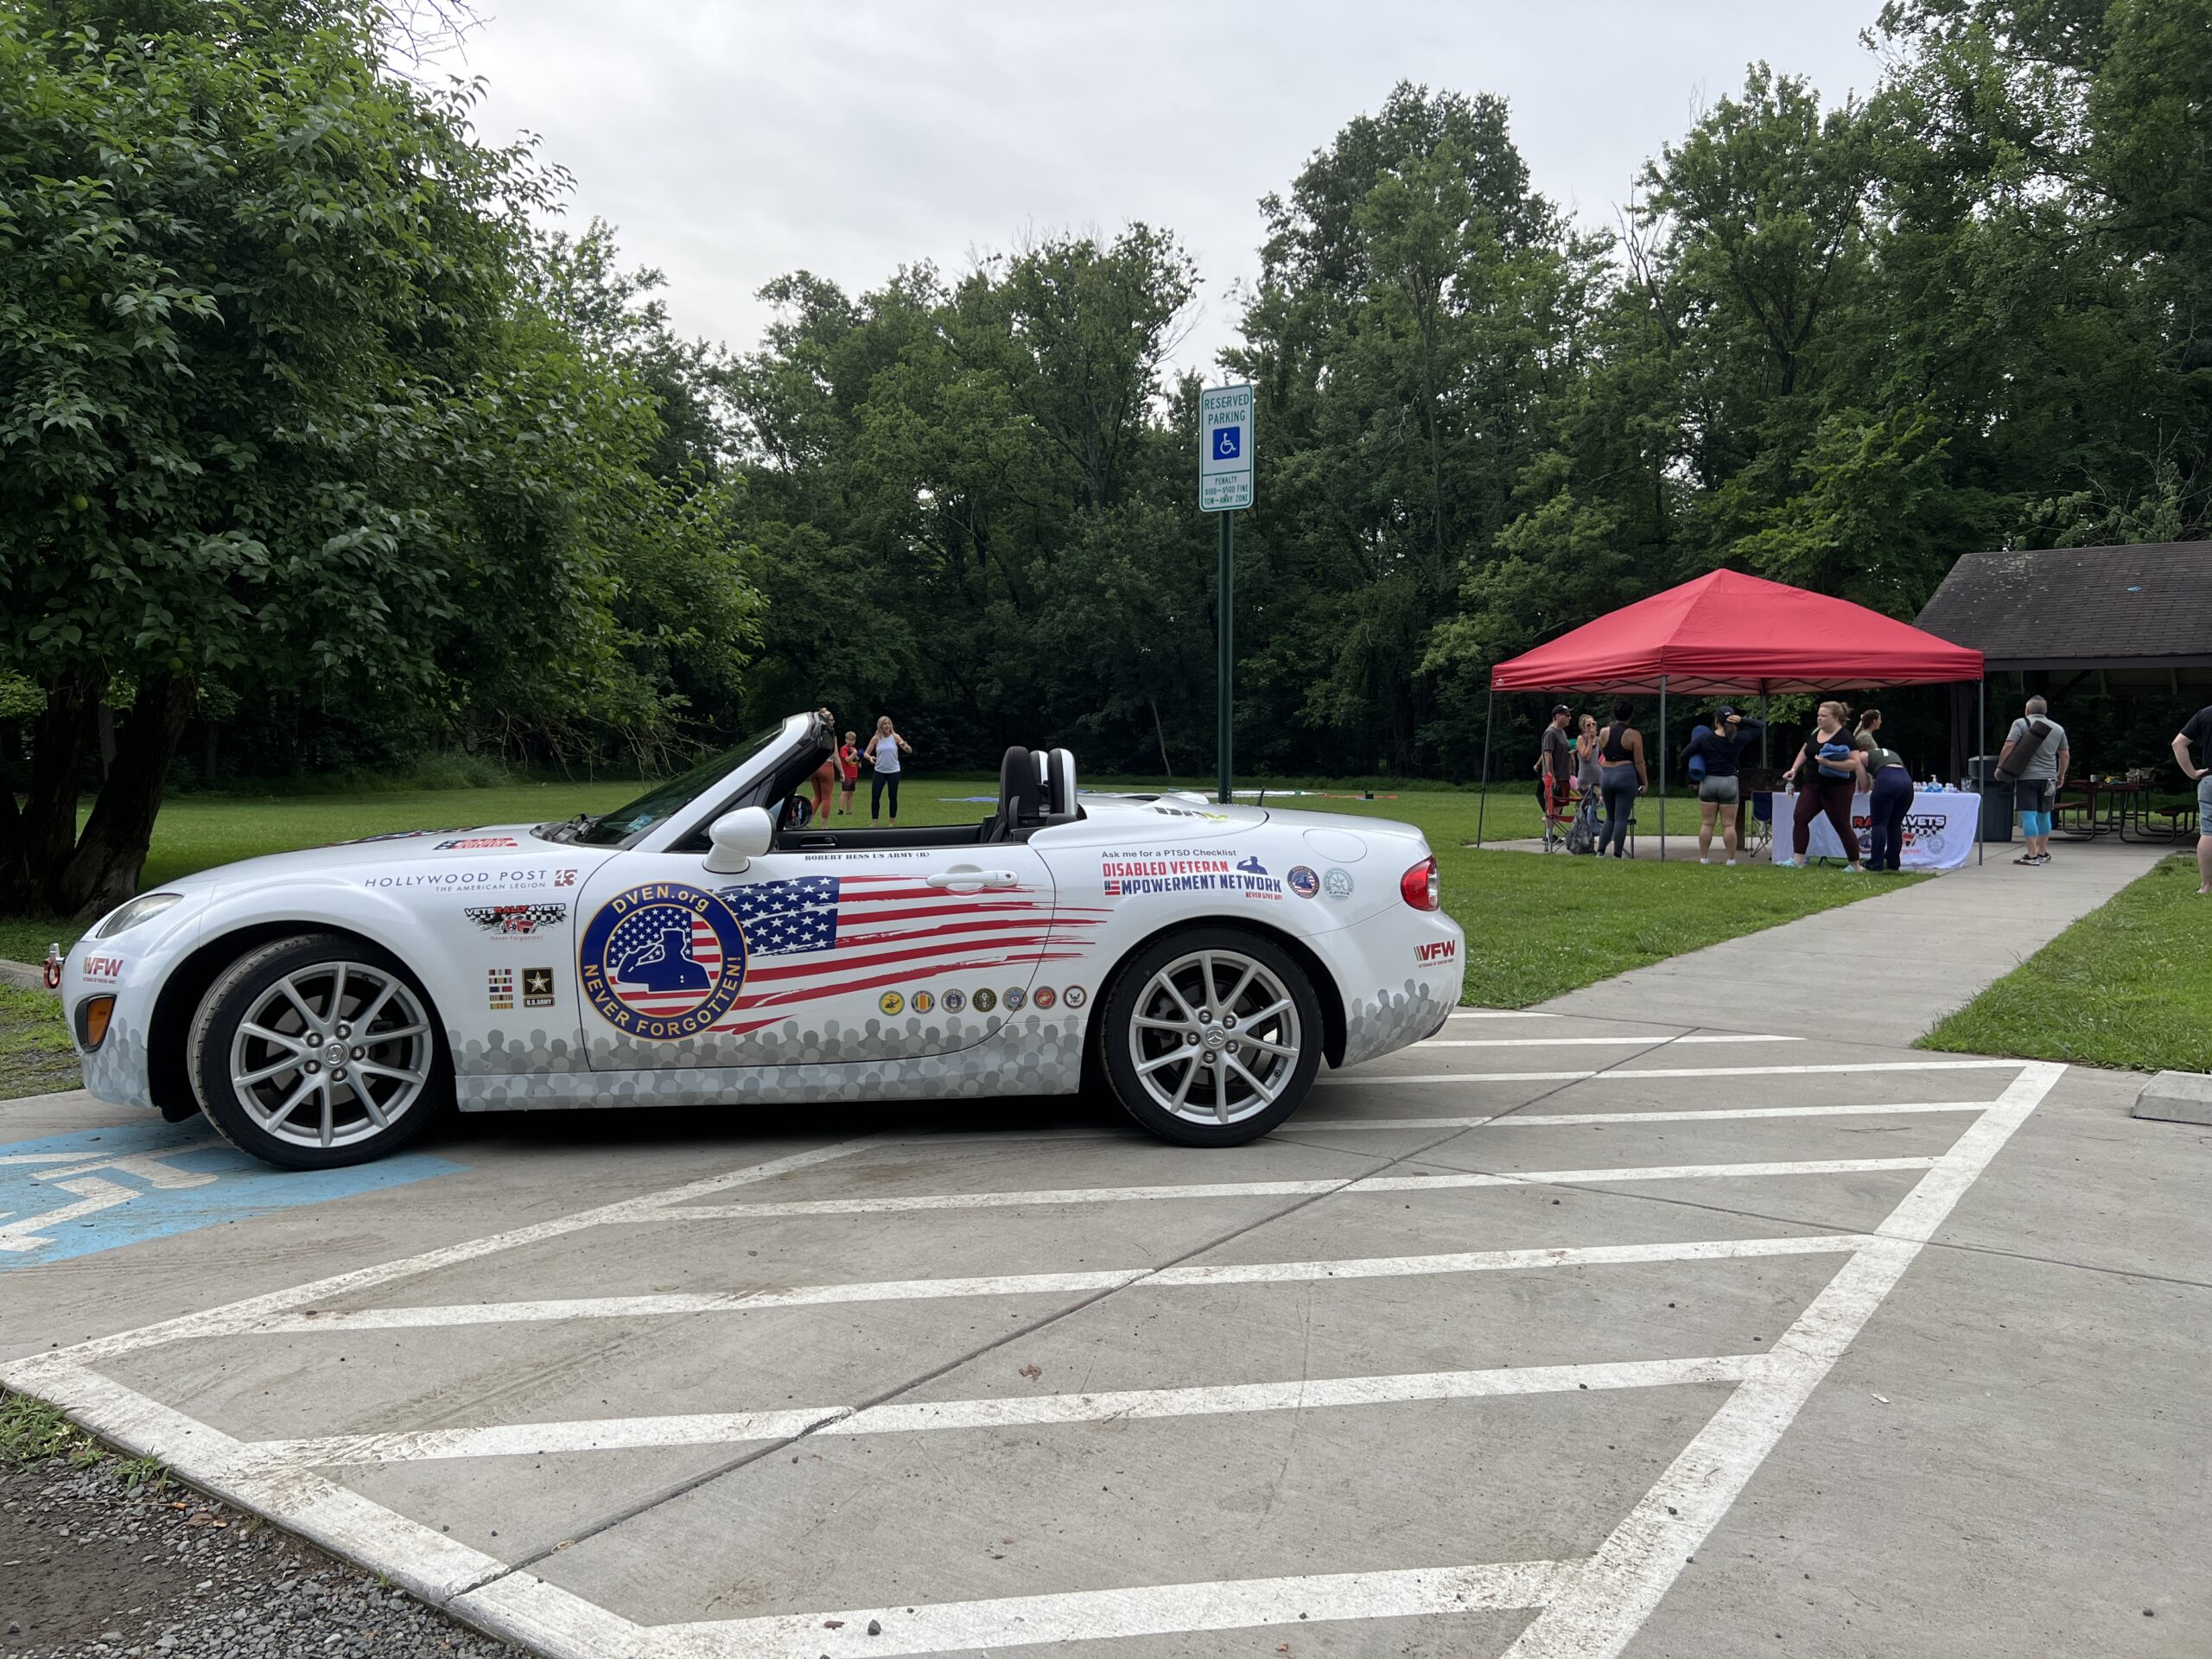 DVEN TOPDOGZ Miata at the first Downward Dog and Donuts event in Sterling, Virginia